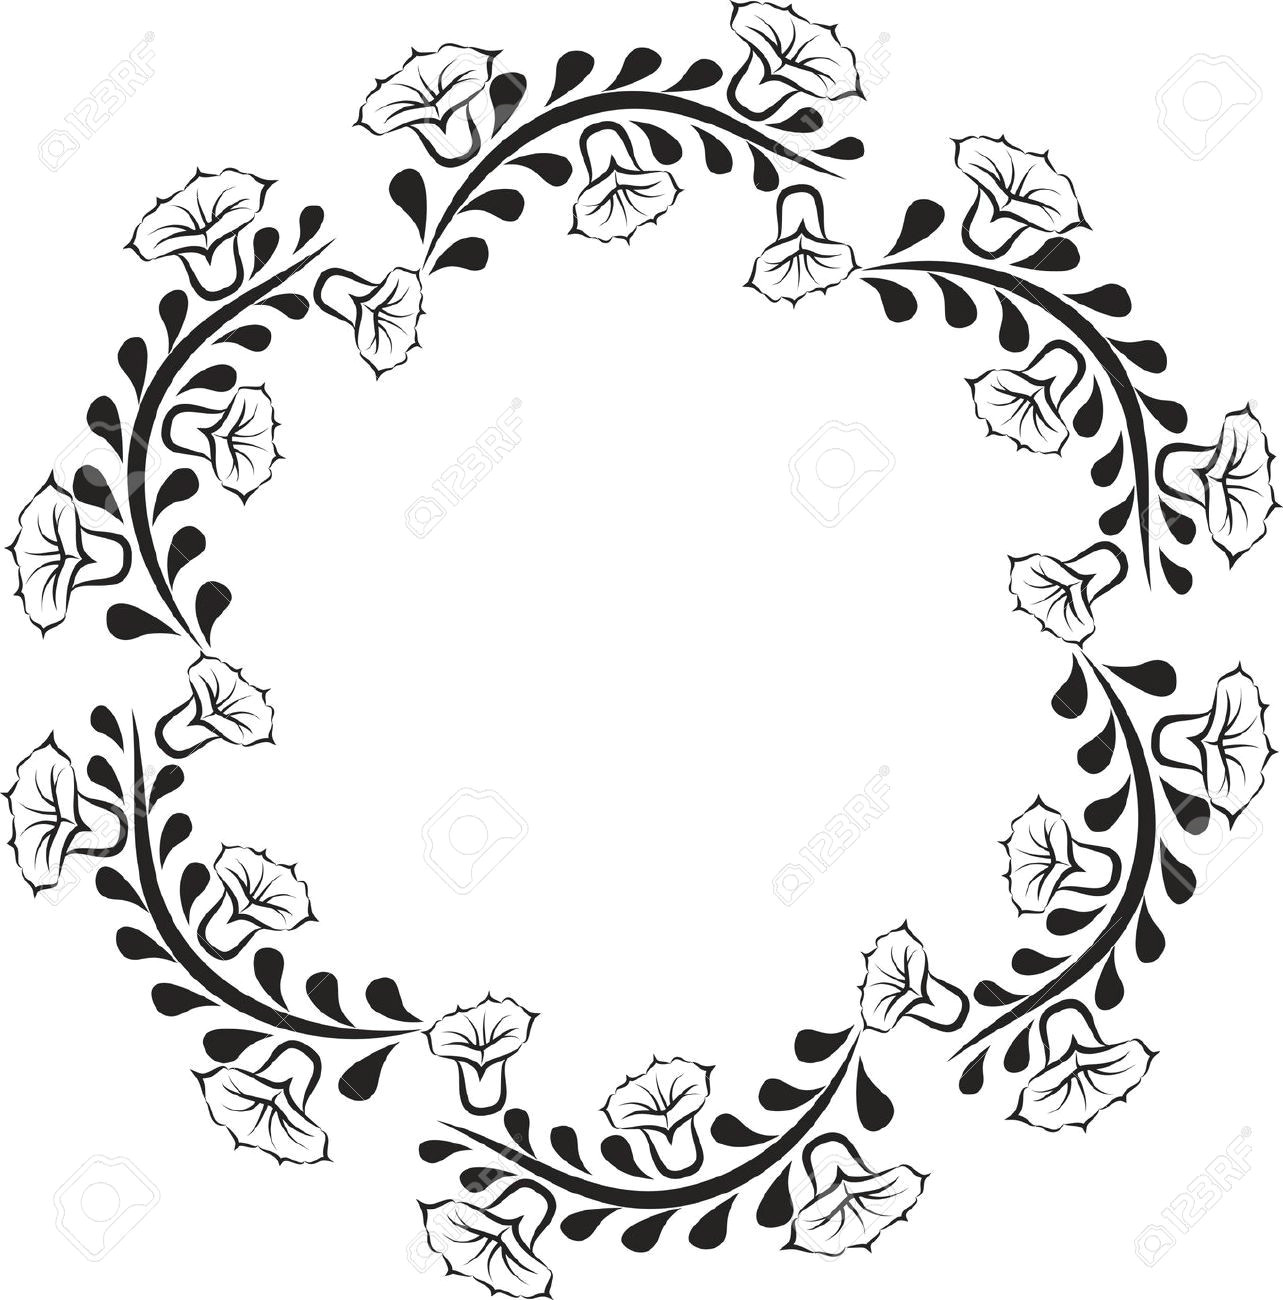 Drawing Of Flower Frame Silhouette Of Round Floral Frame Royalty Free Cliparts Vectors and